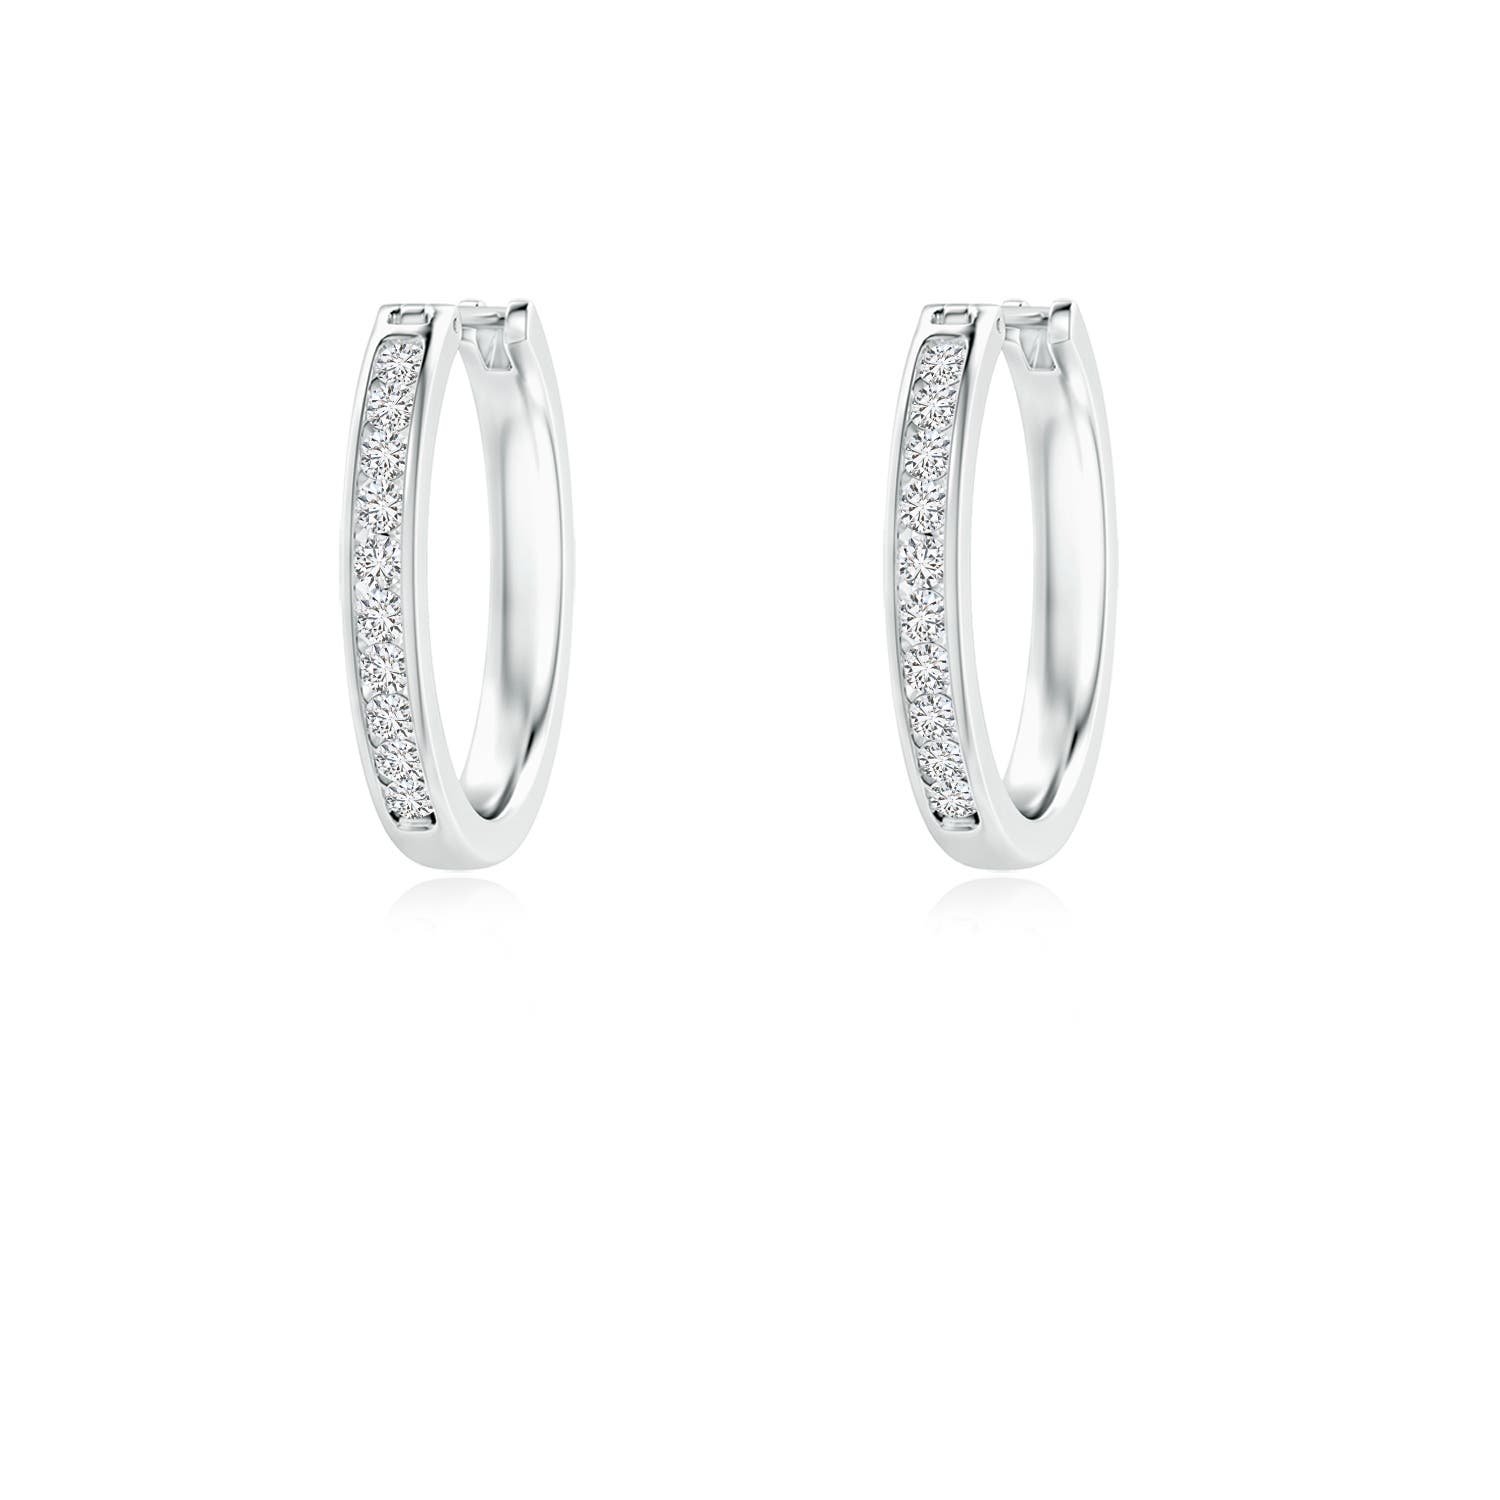 H, SI2 / 0.34 CT / 14 KT White Gold